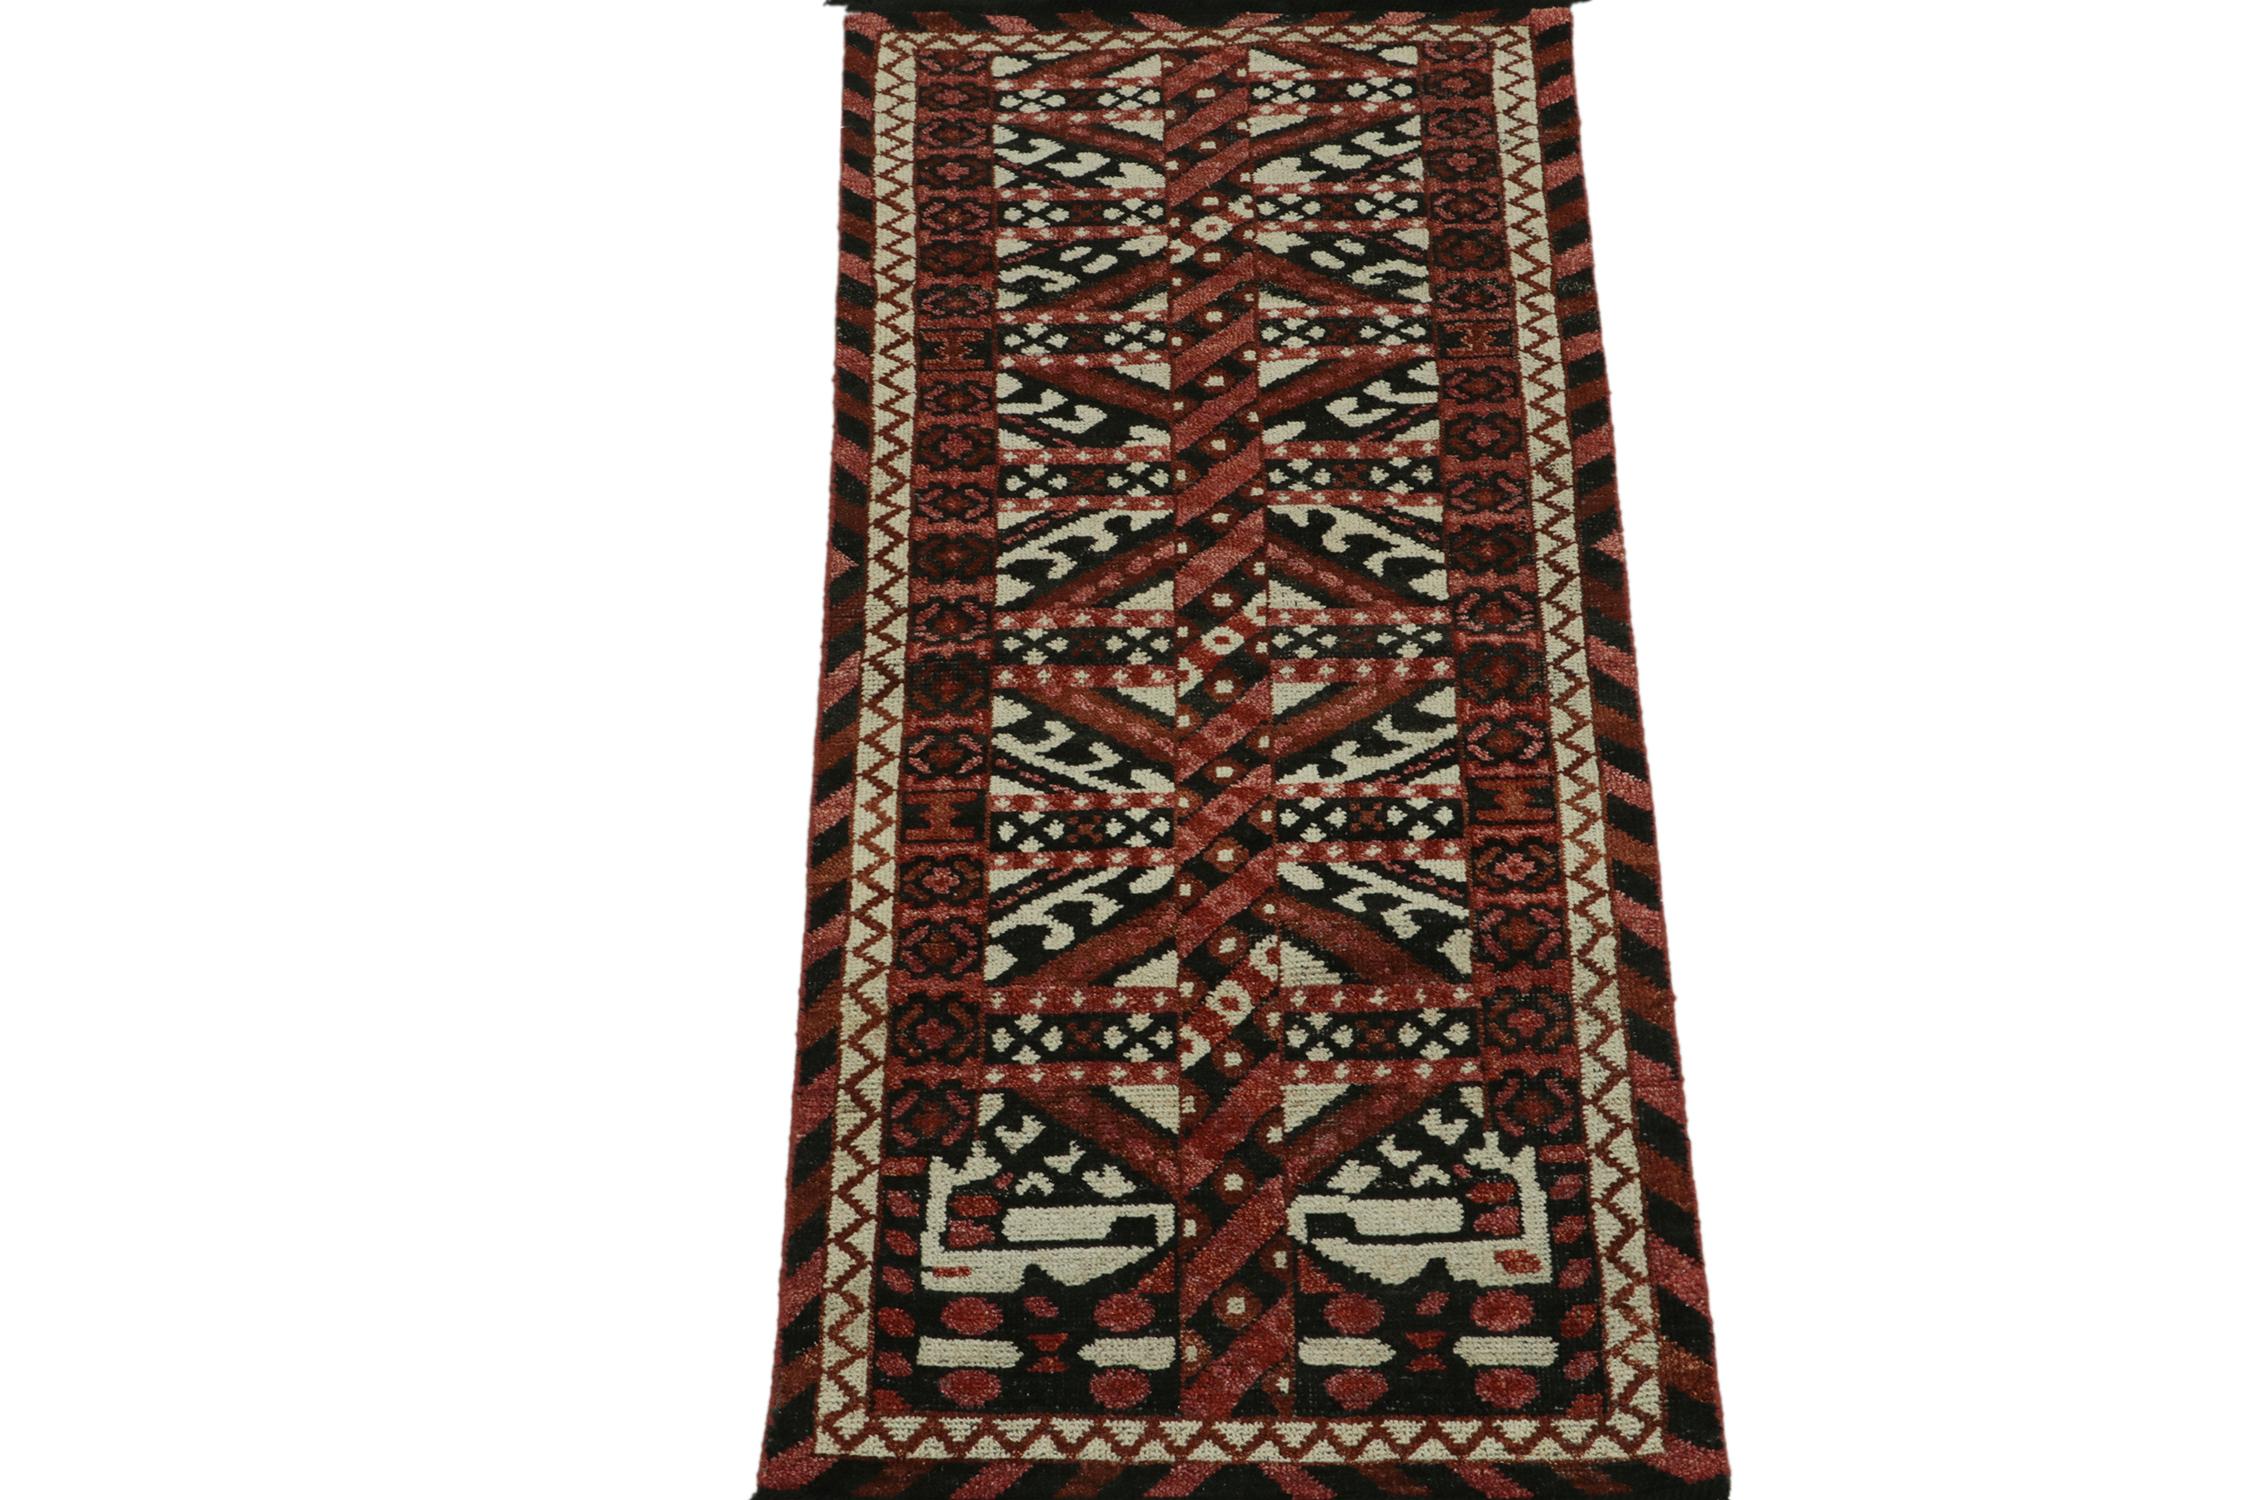 Indian Rug & Kilim’s Tribal style runner in red, black and white geometric pattern For Sale